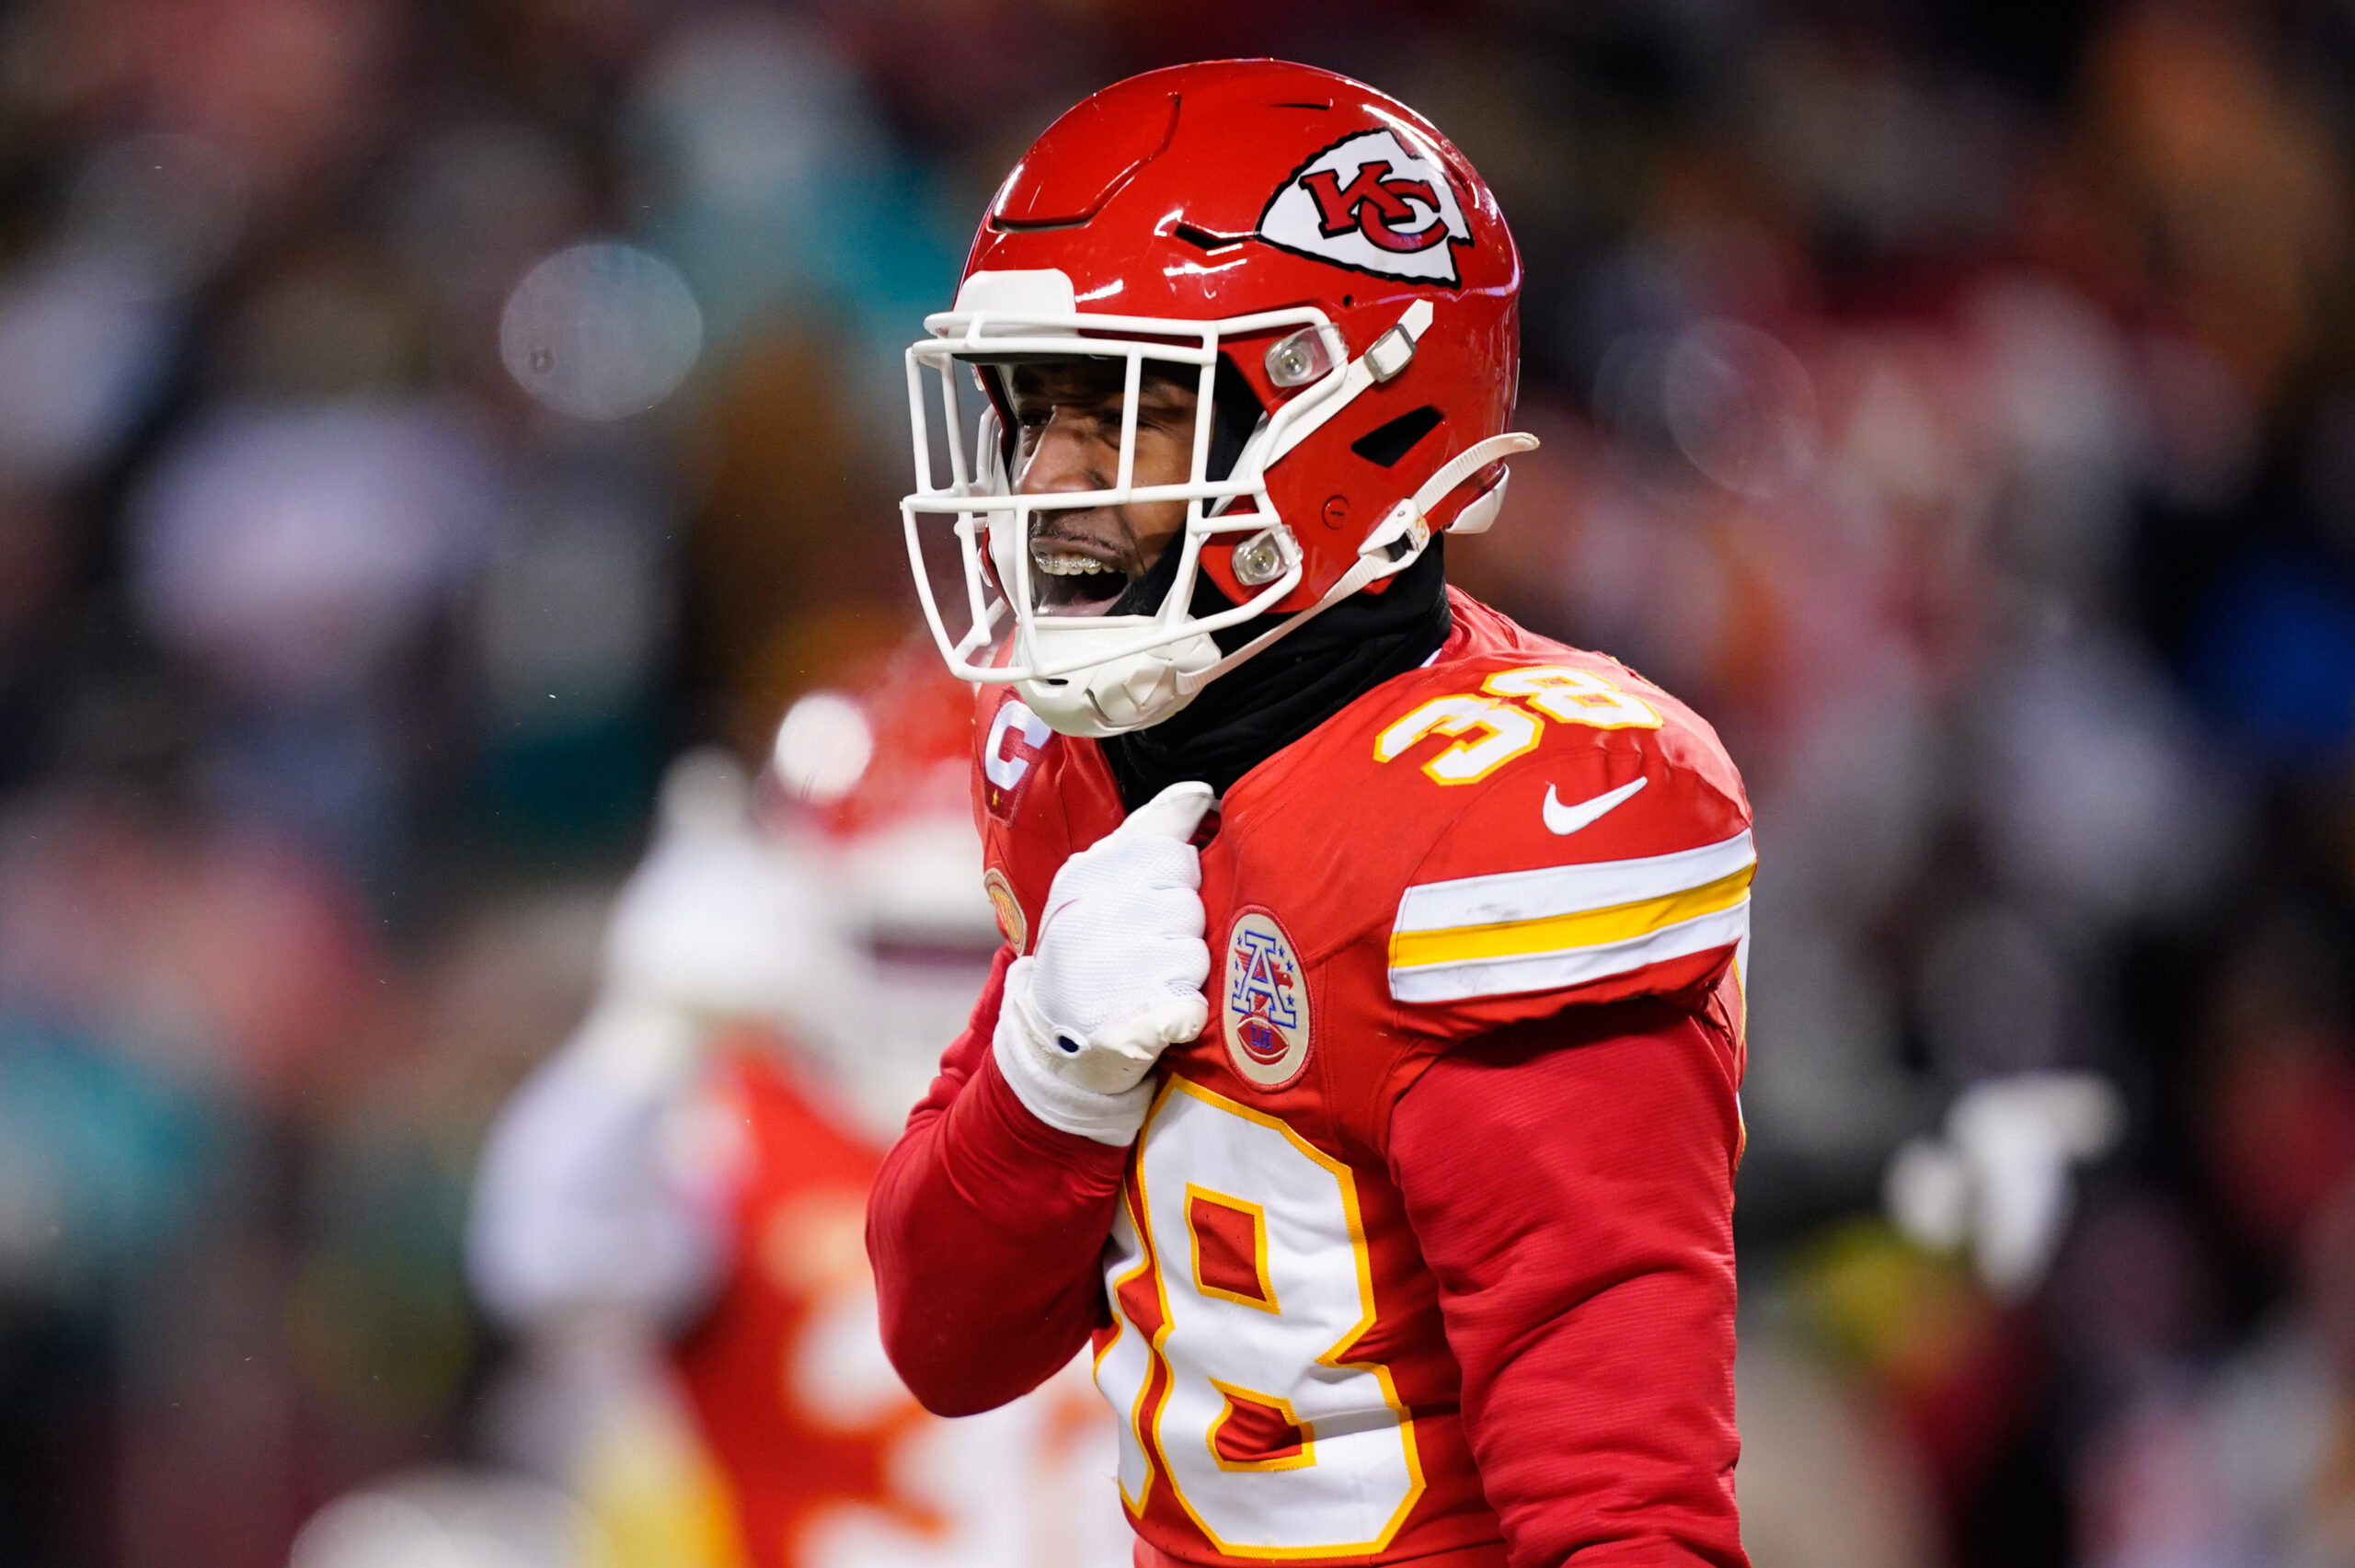 Bengals WR Ja’Marr Chase name-dropped by Chiefs CB after Super Bowl